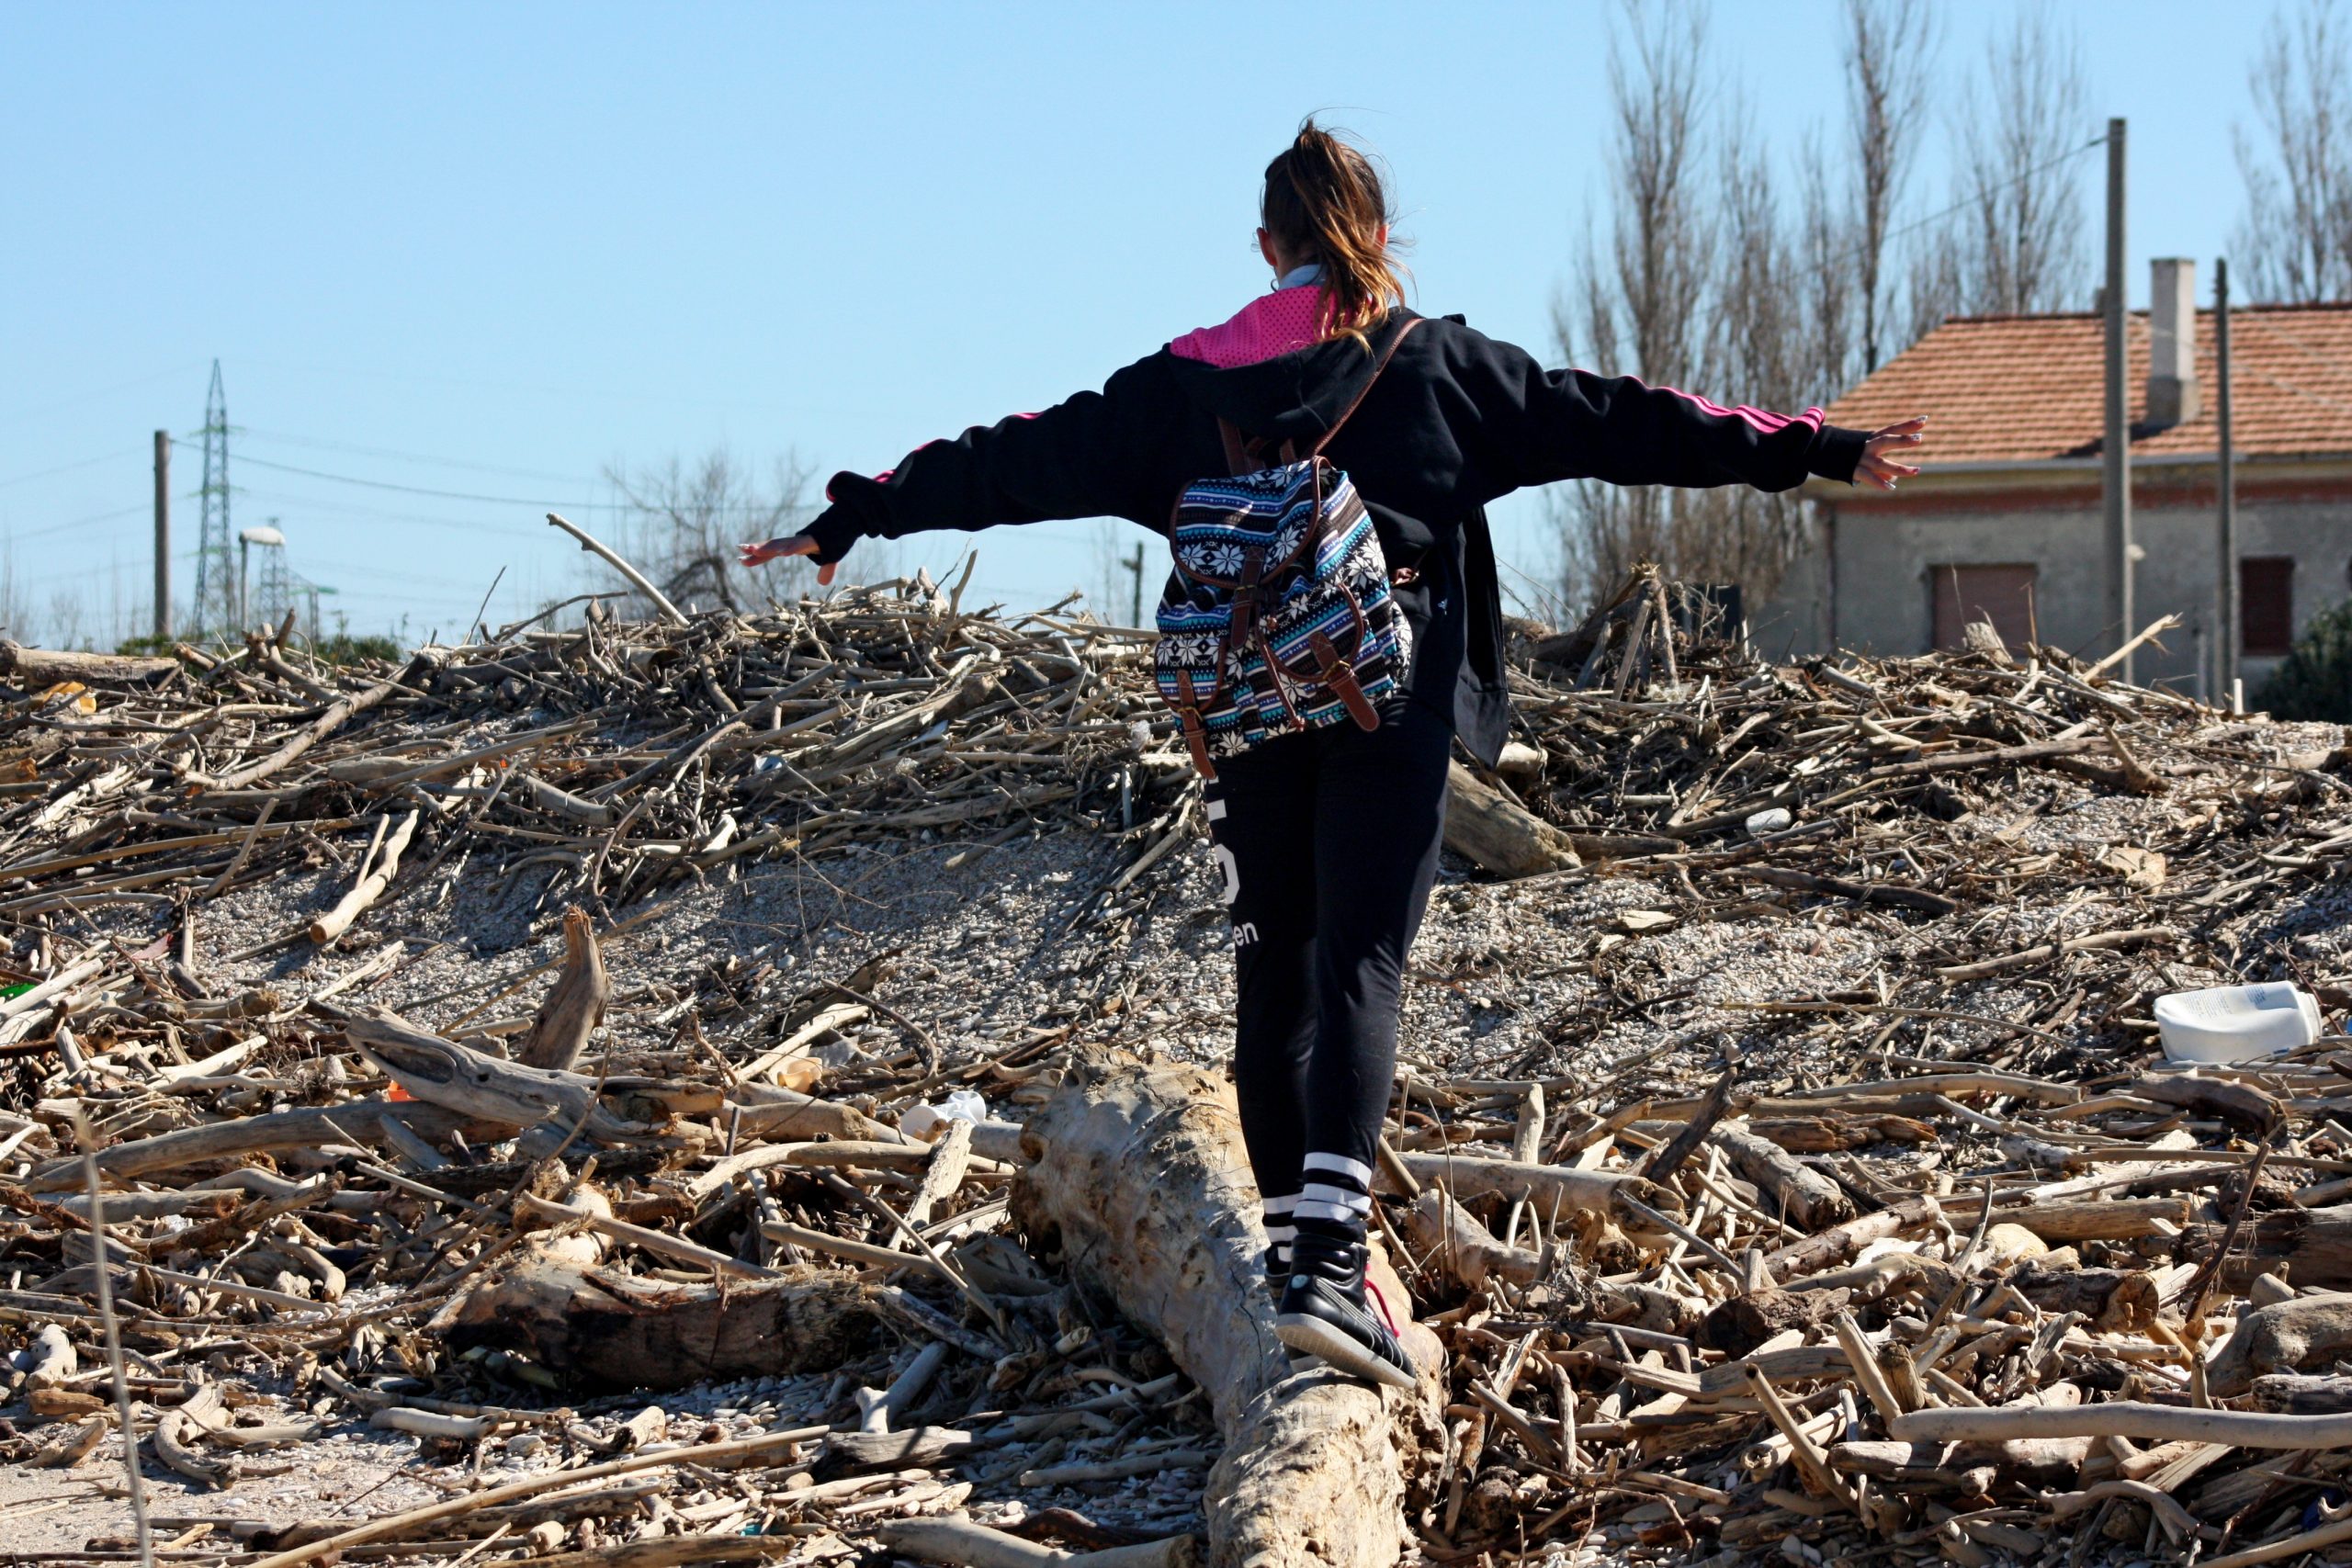 girl-waste-scrap-tree-disaster-rubble-1434807-pxhere.com -scaled